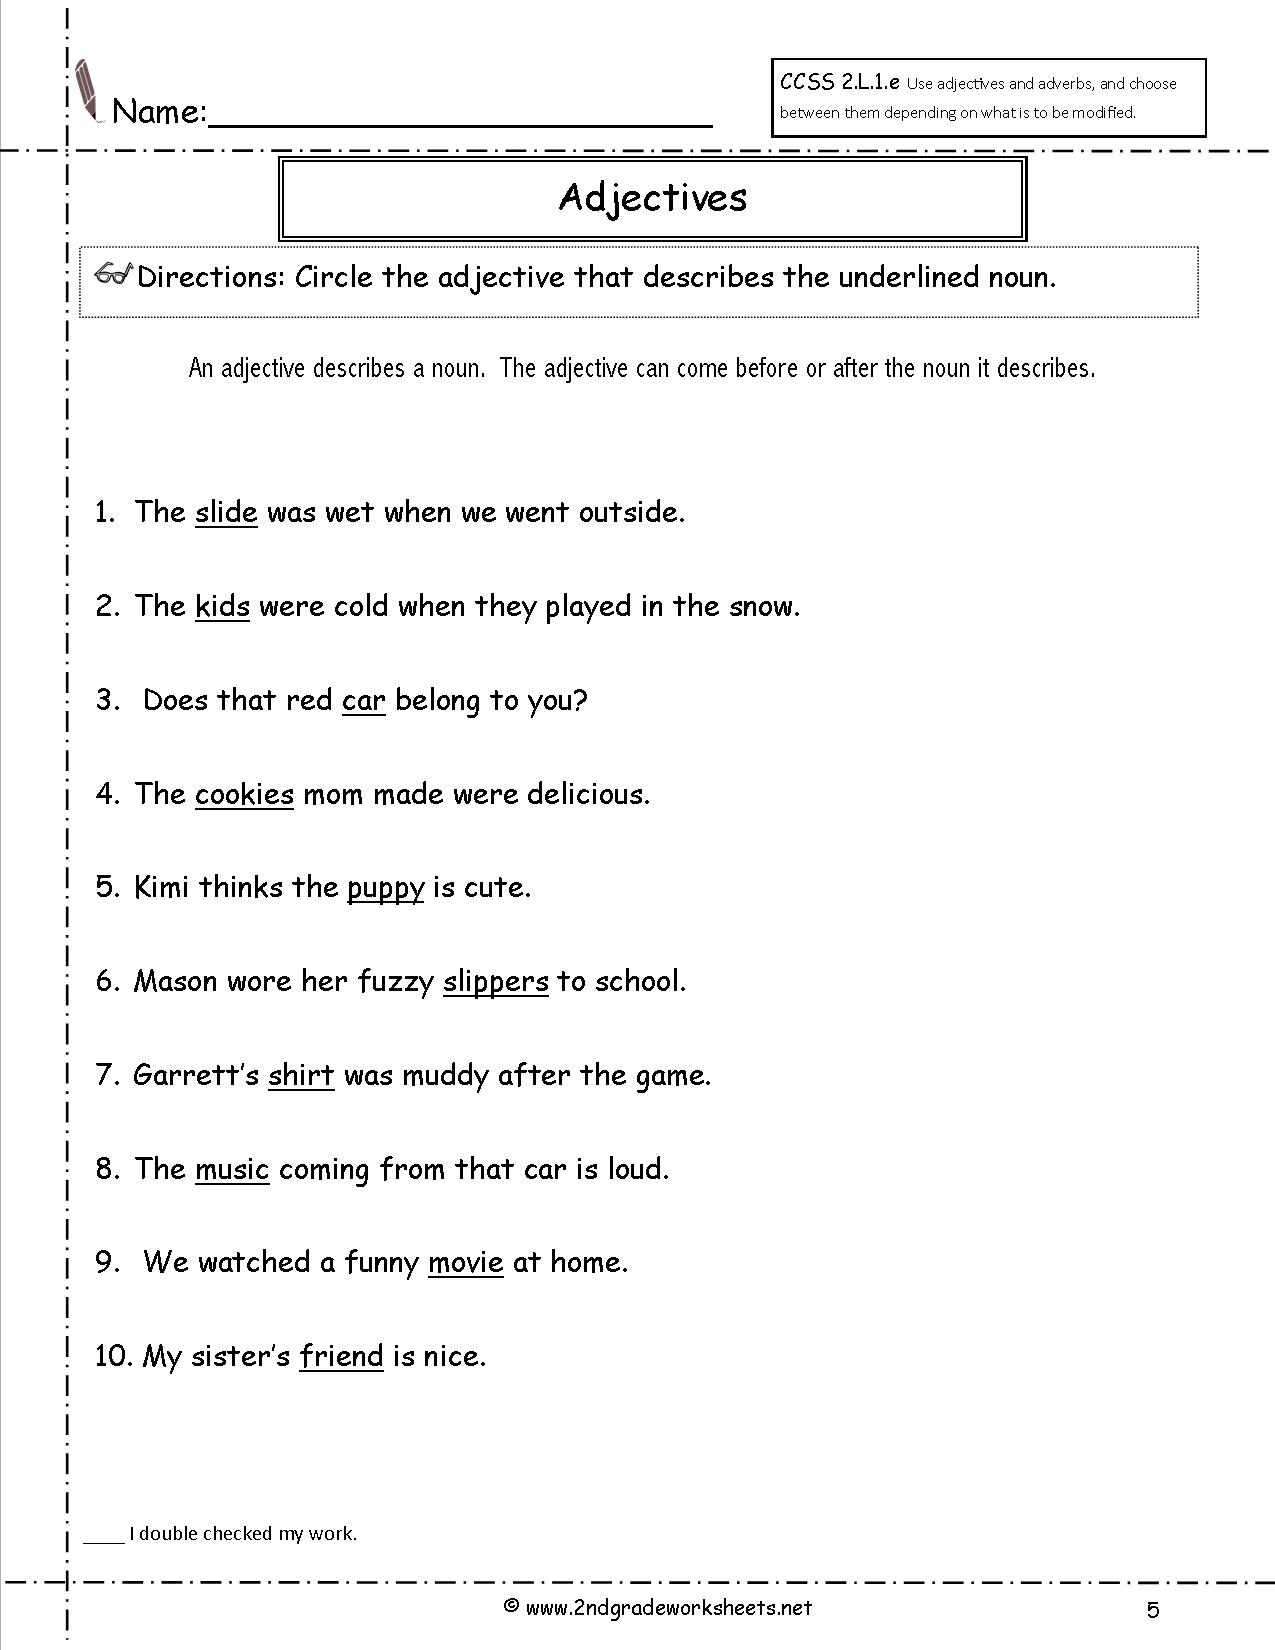 free-using-adjectives-worksheets